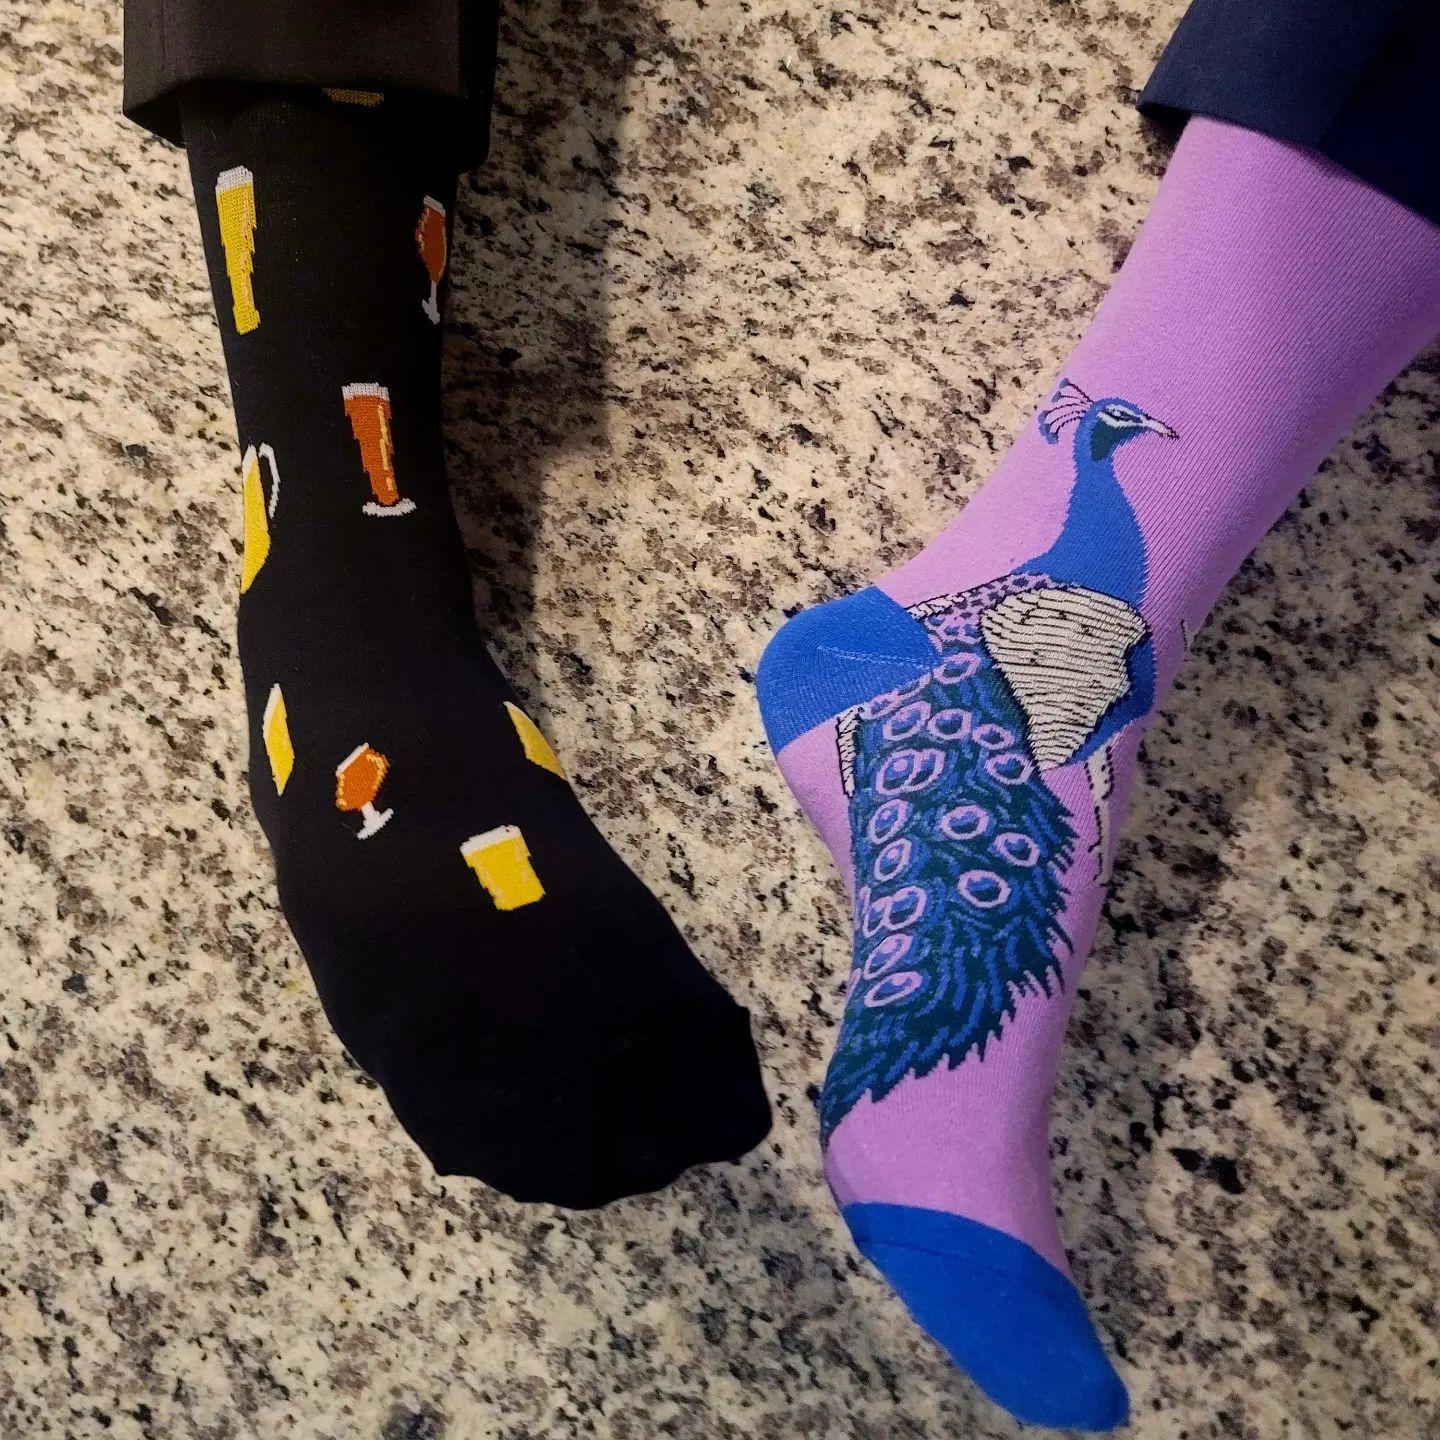 The Unforgettable Trend of Wearing Mismatched Socks: Embracing Individuality and Breaking Societal Norms